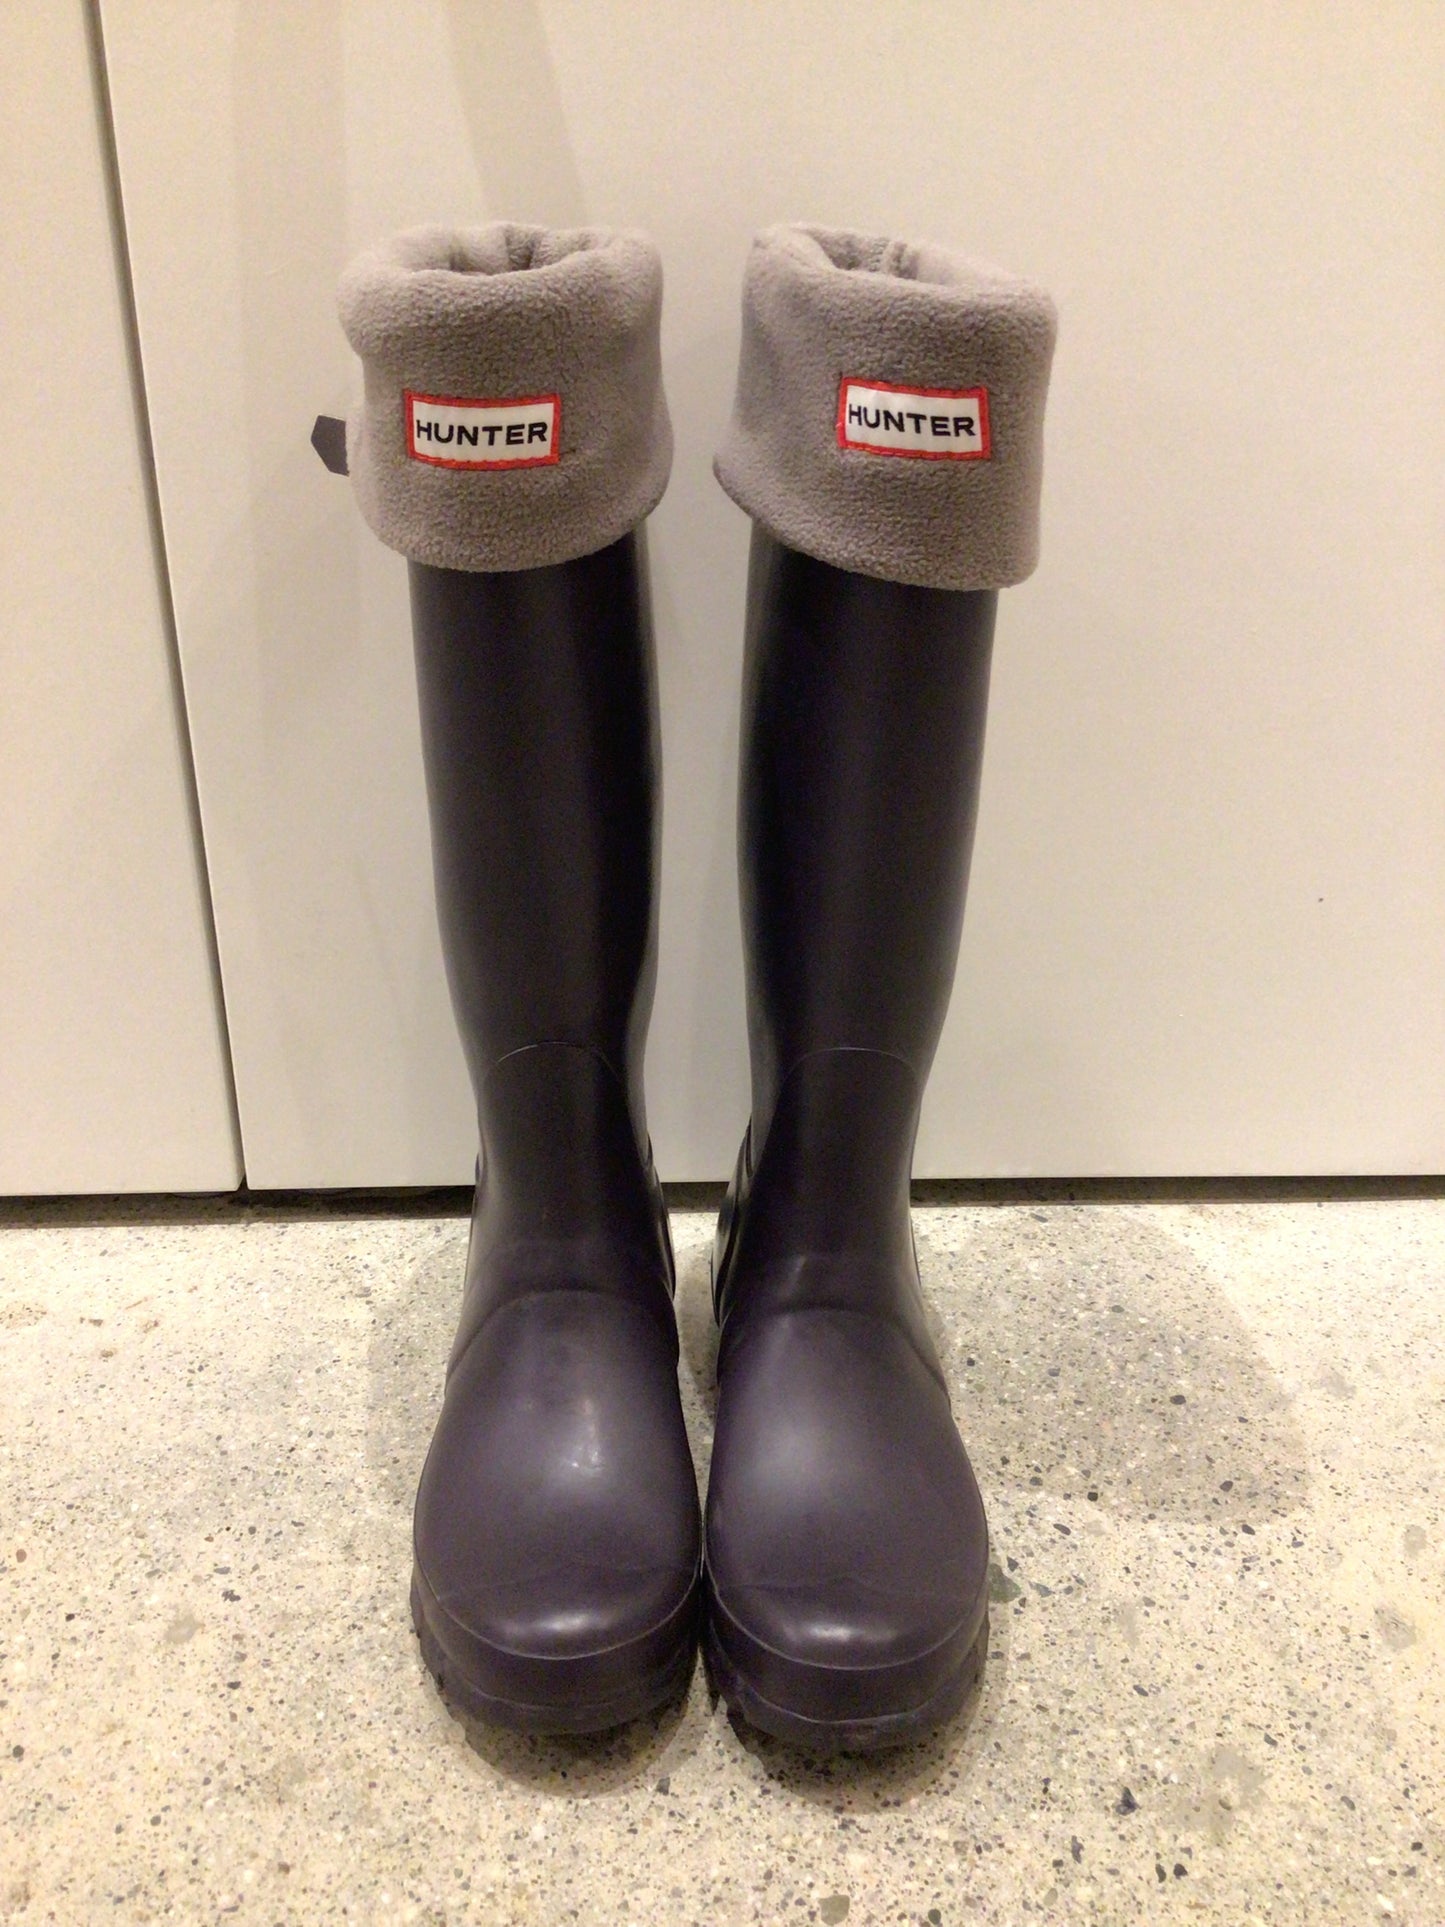 Consignment 8006-64 Hunter Wellies including fleece liners. Size 38.